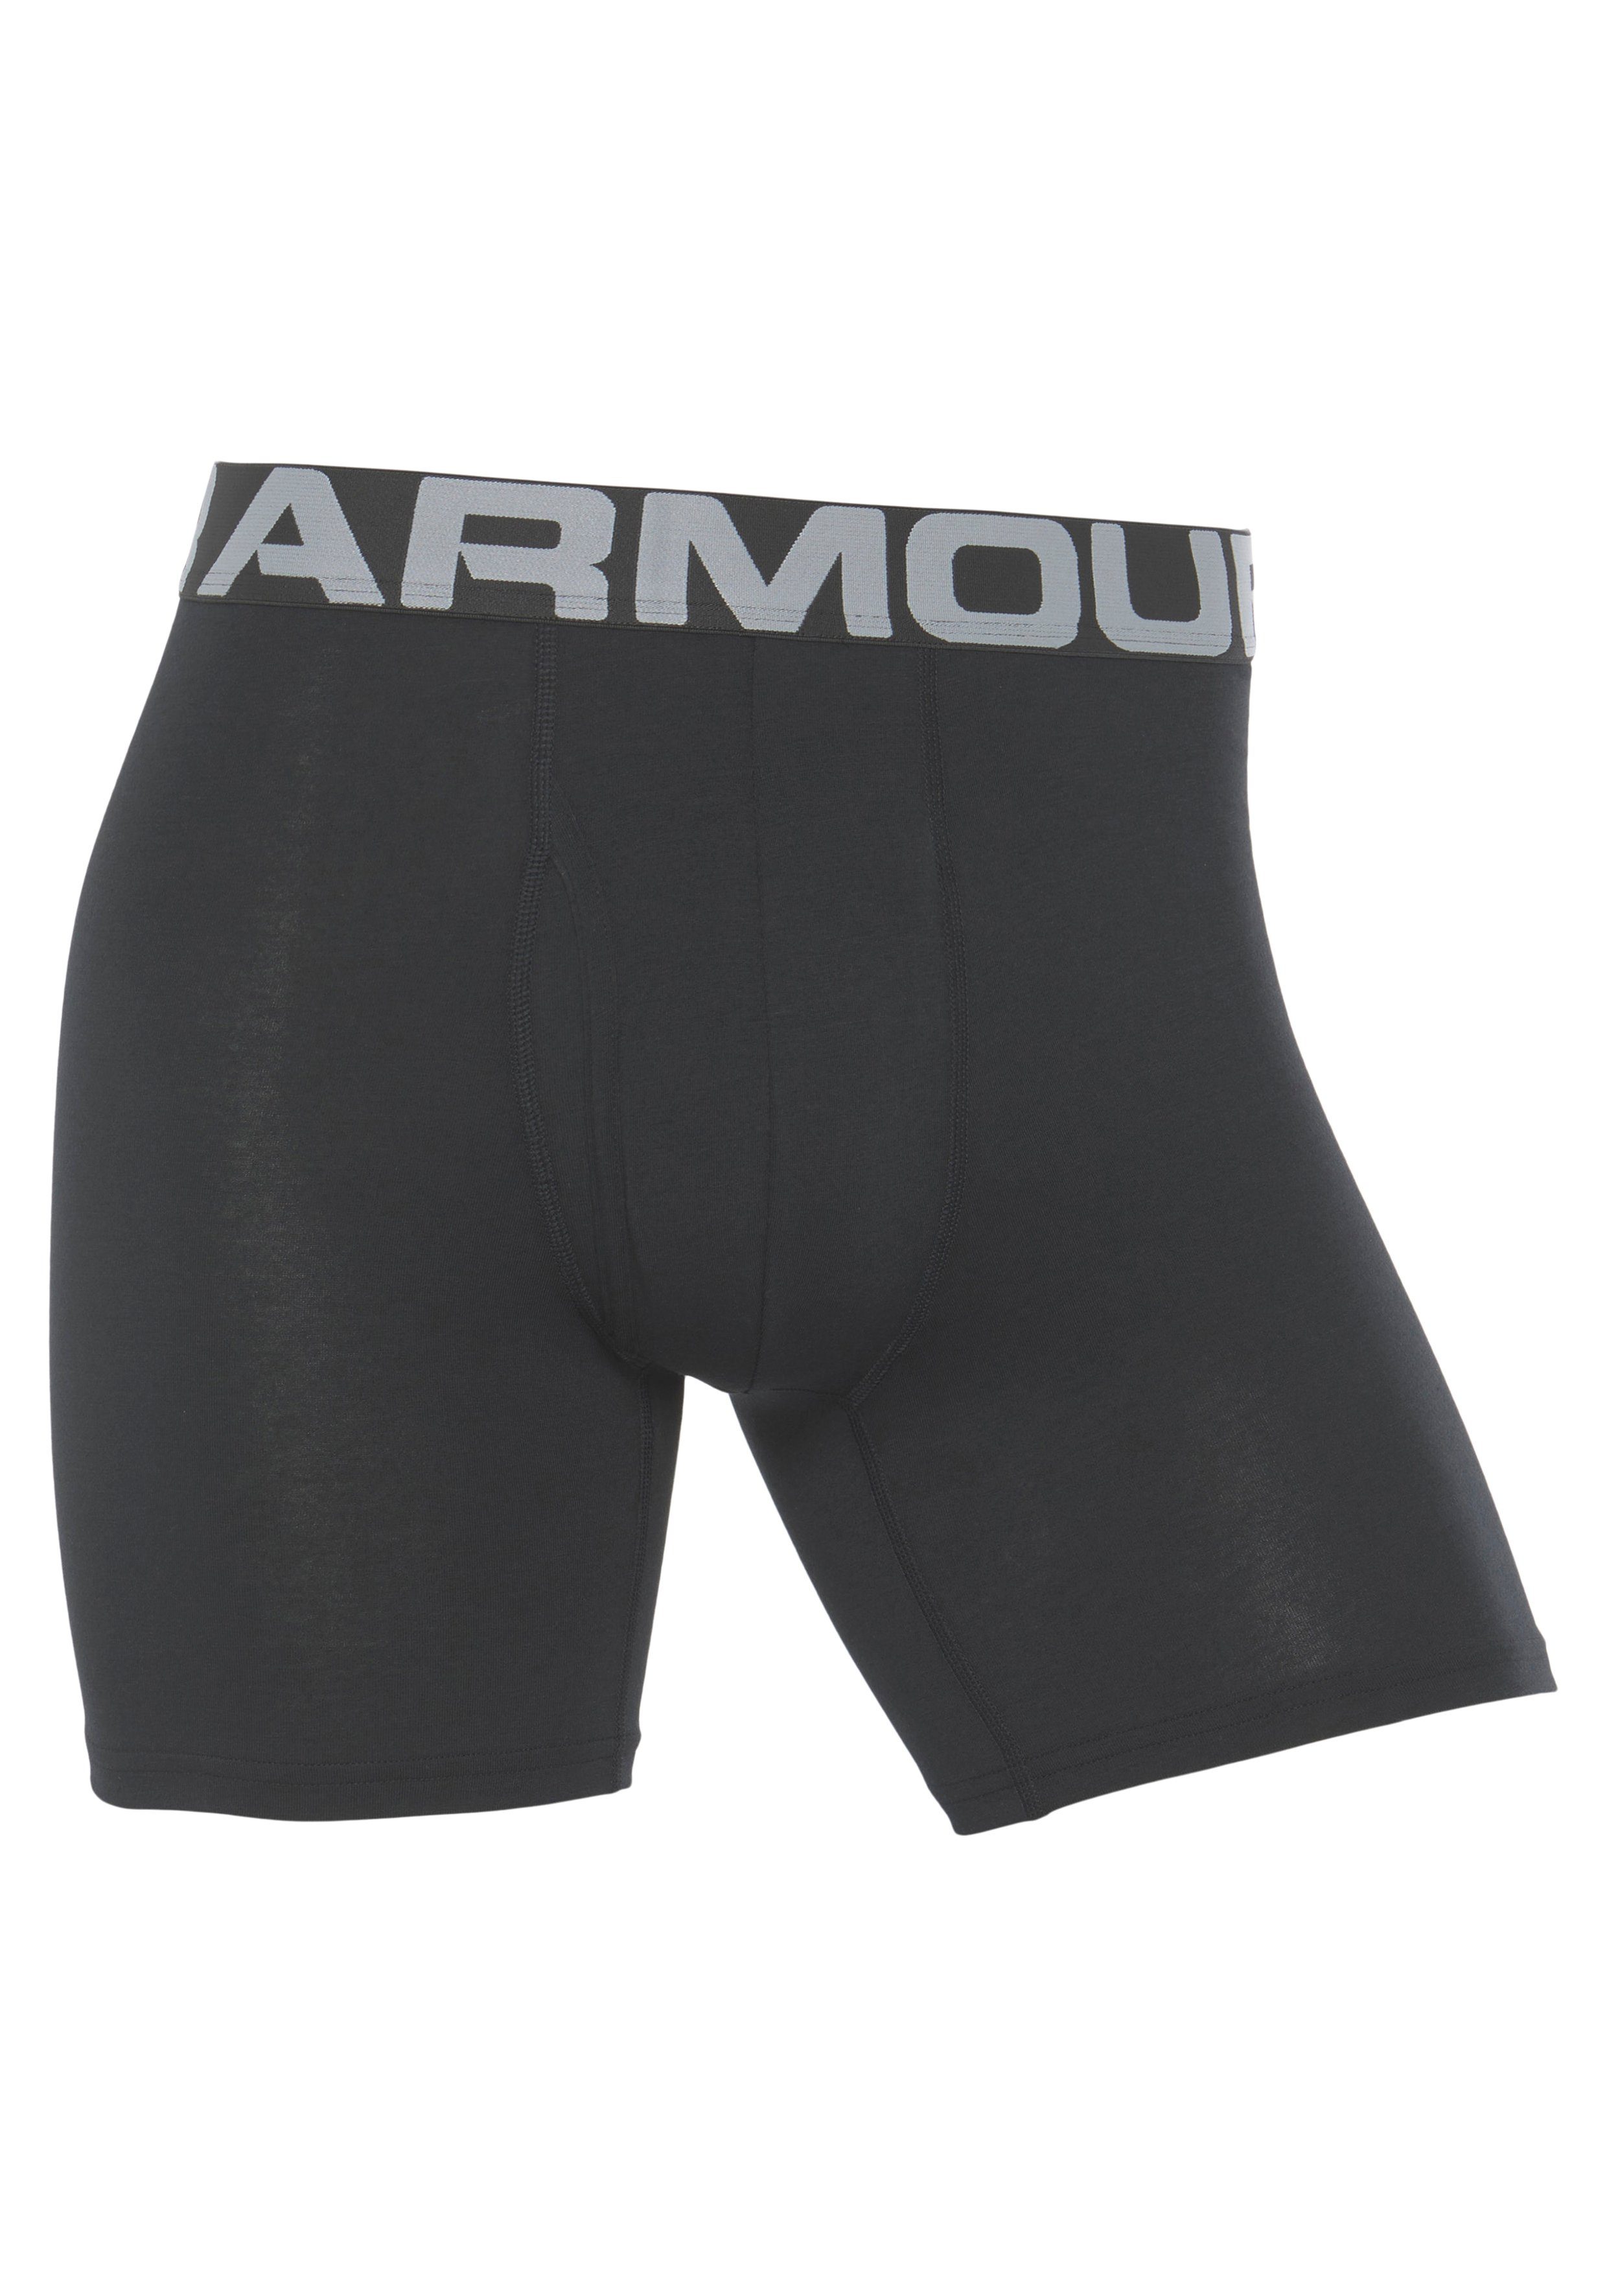 Under Armour® 1 schwarz 3er-Pack) PACK (Packung, Boxershorts CHARGED 3-St., COTTON in 6